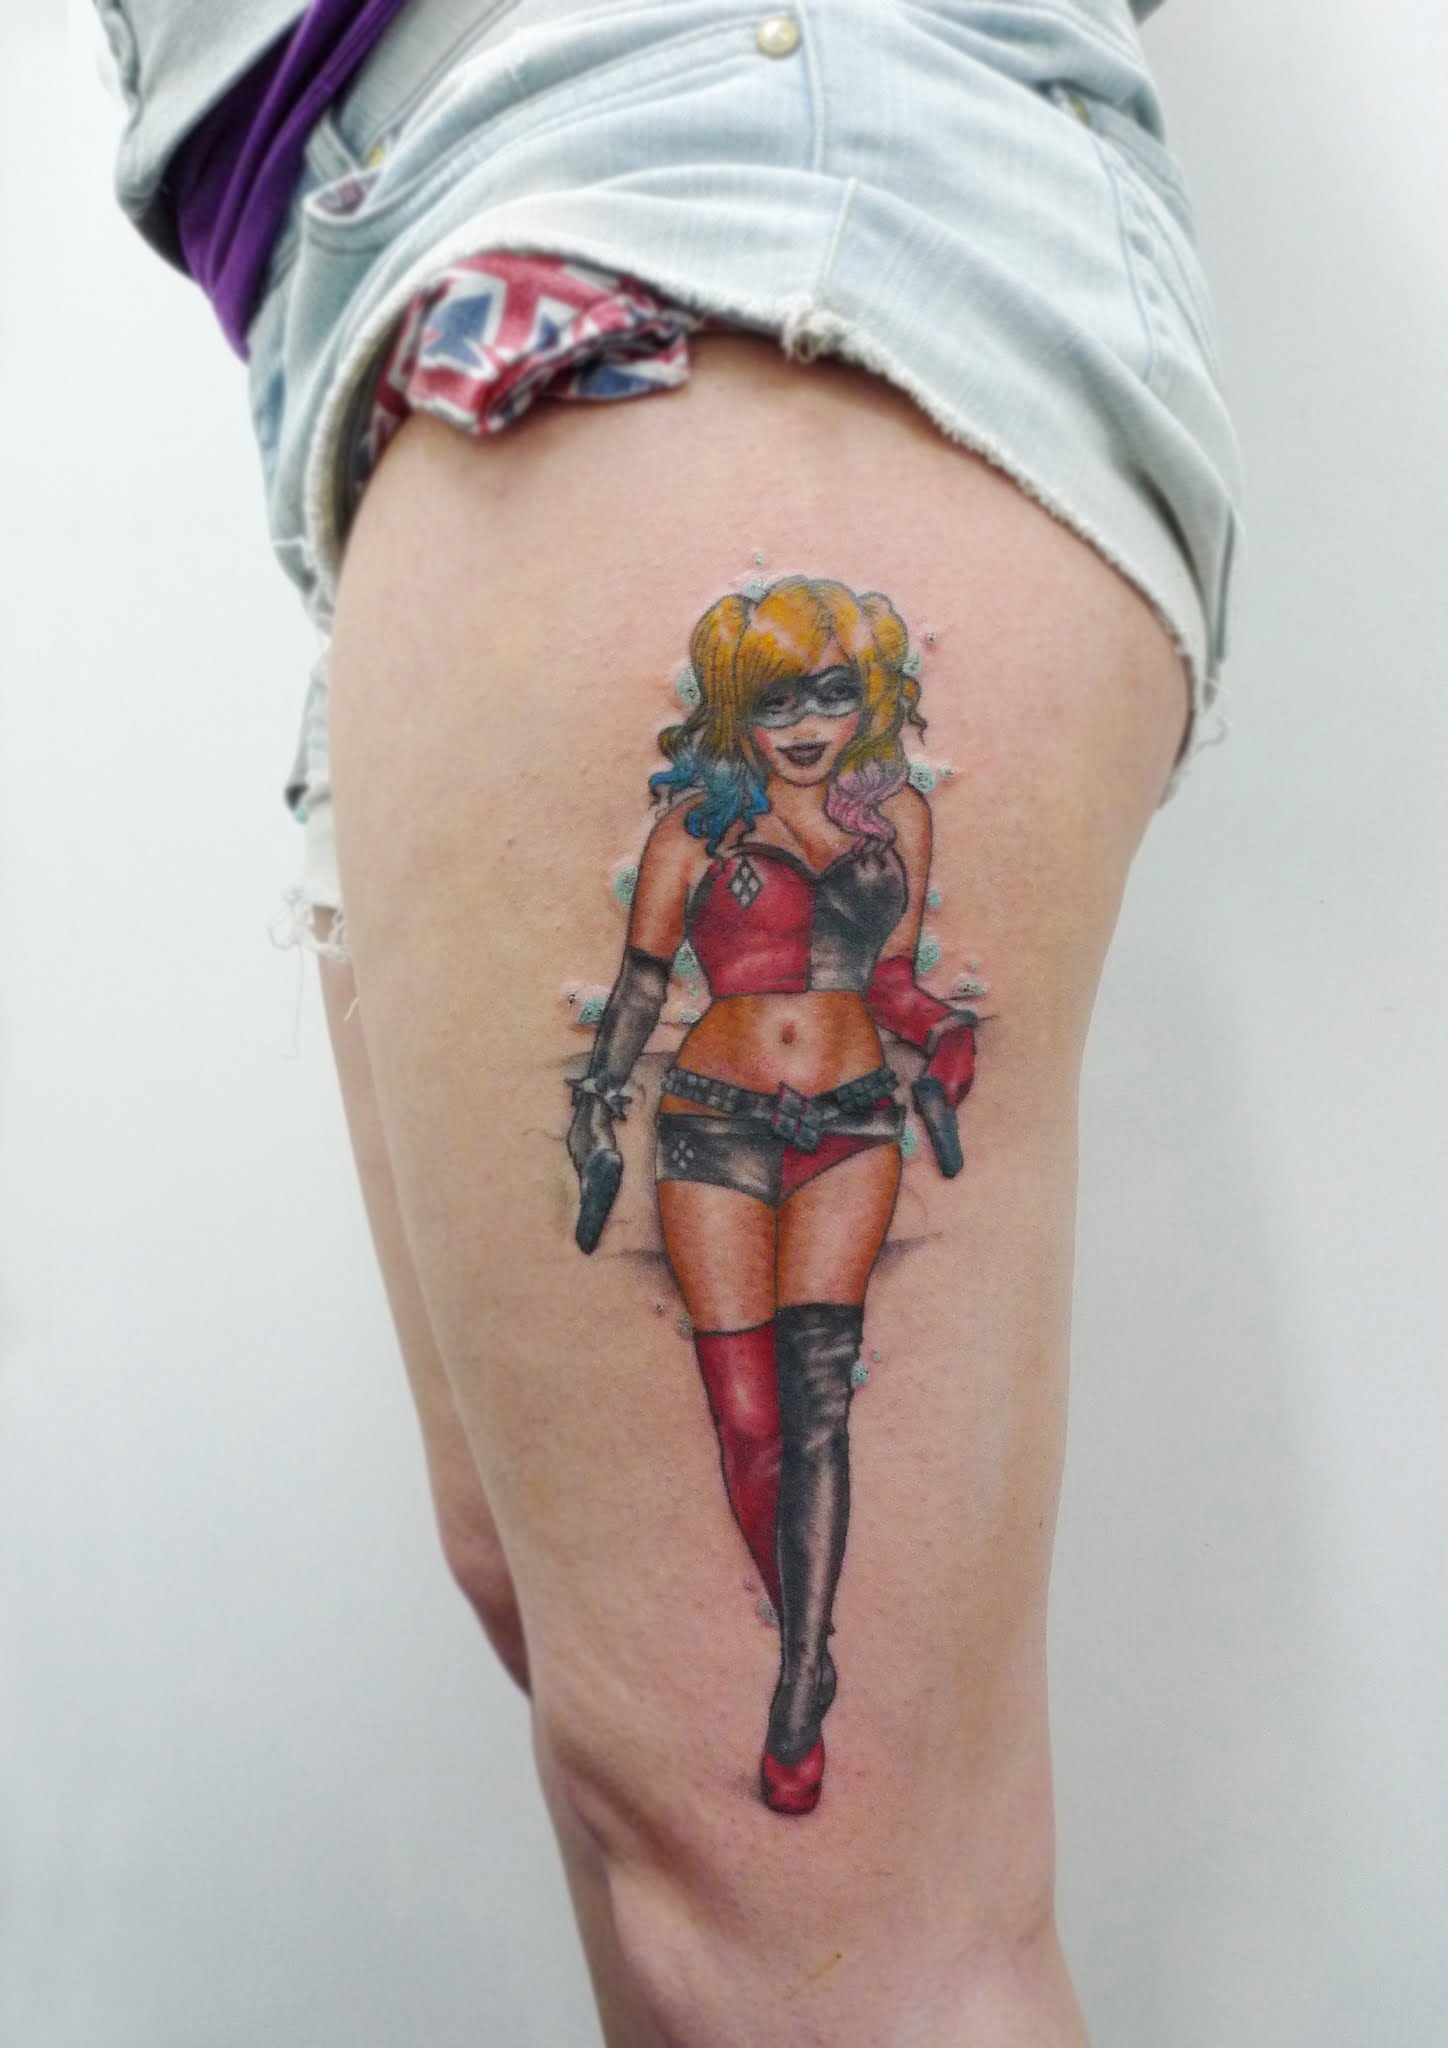 26 Harley Quinn Tattoo Ideas from Suicide Squad